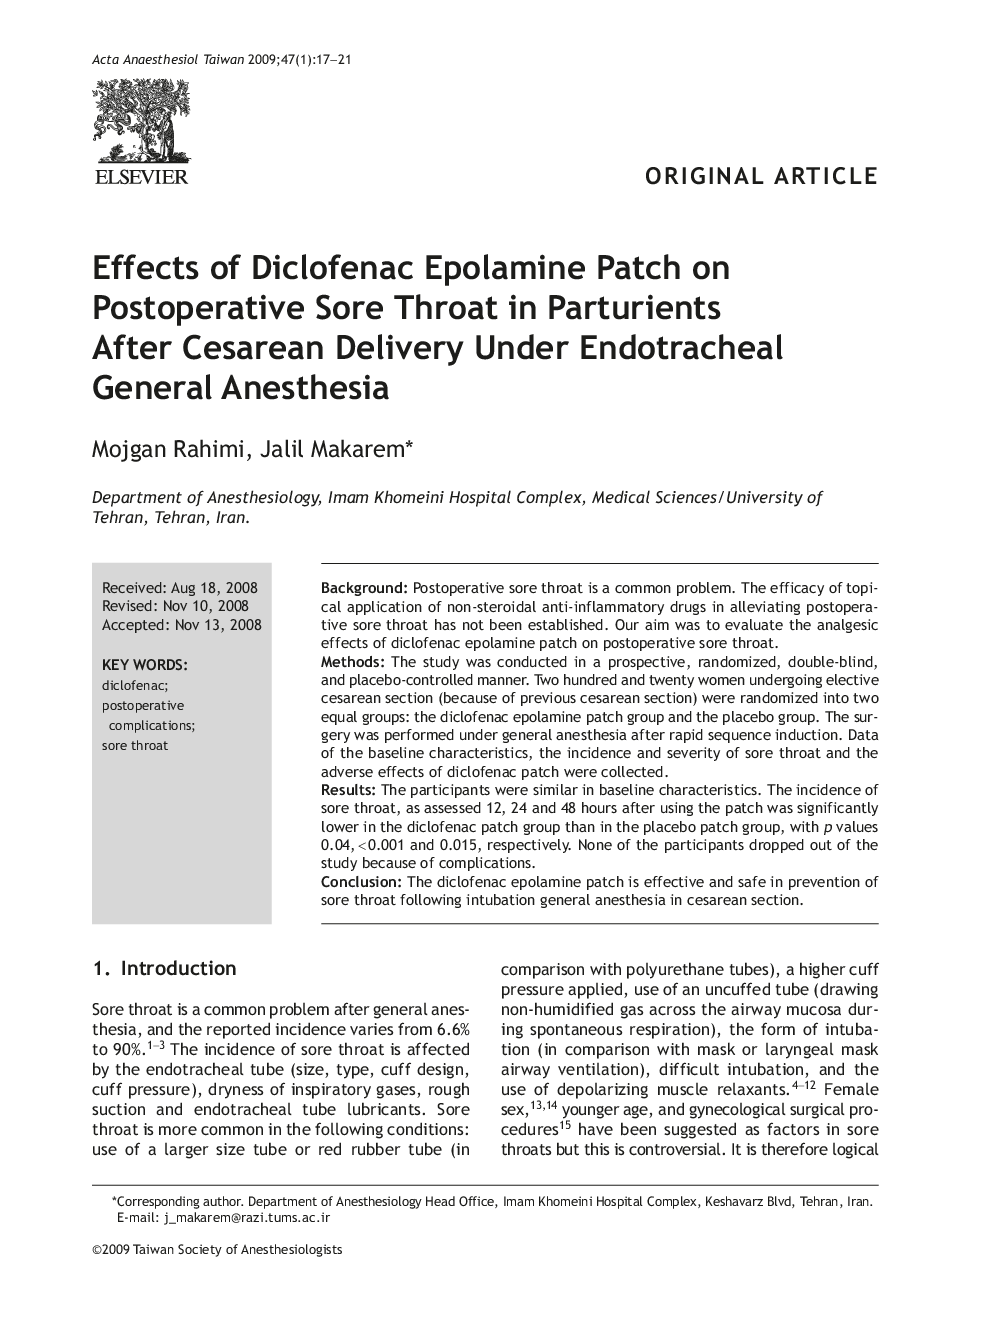 Effects of Diclofenac Epolamine Patch on Postoperative Sore Throat in Parturients After Cesarean Delivery Under Endotracheal General Anesthesia